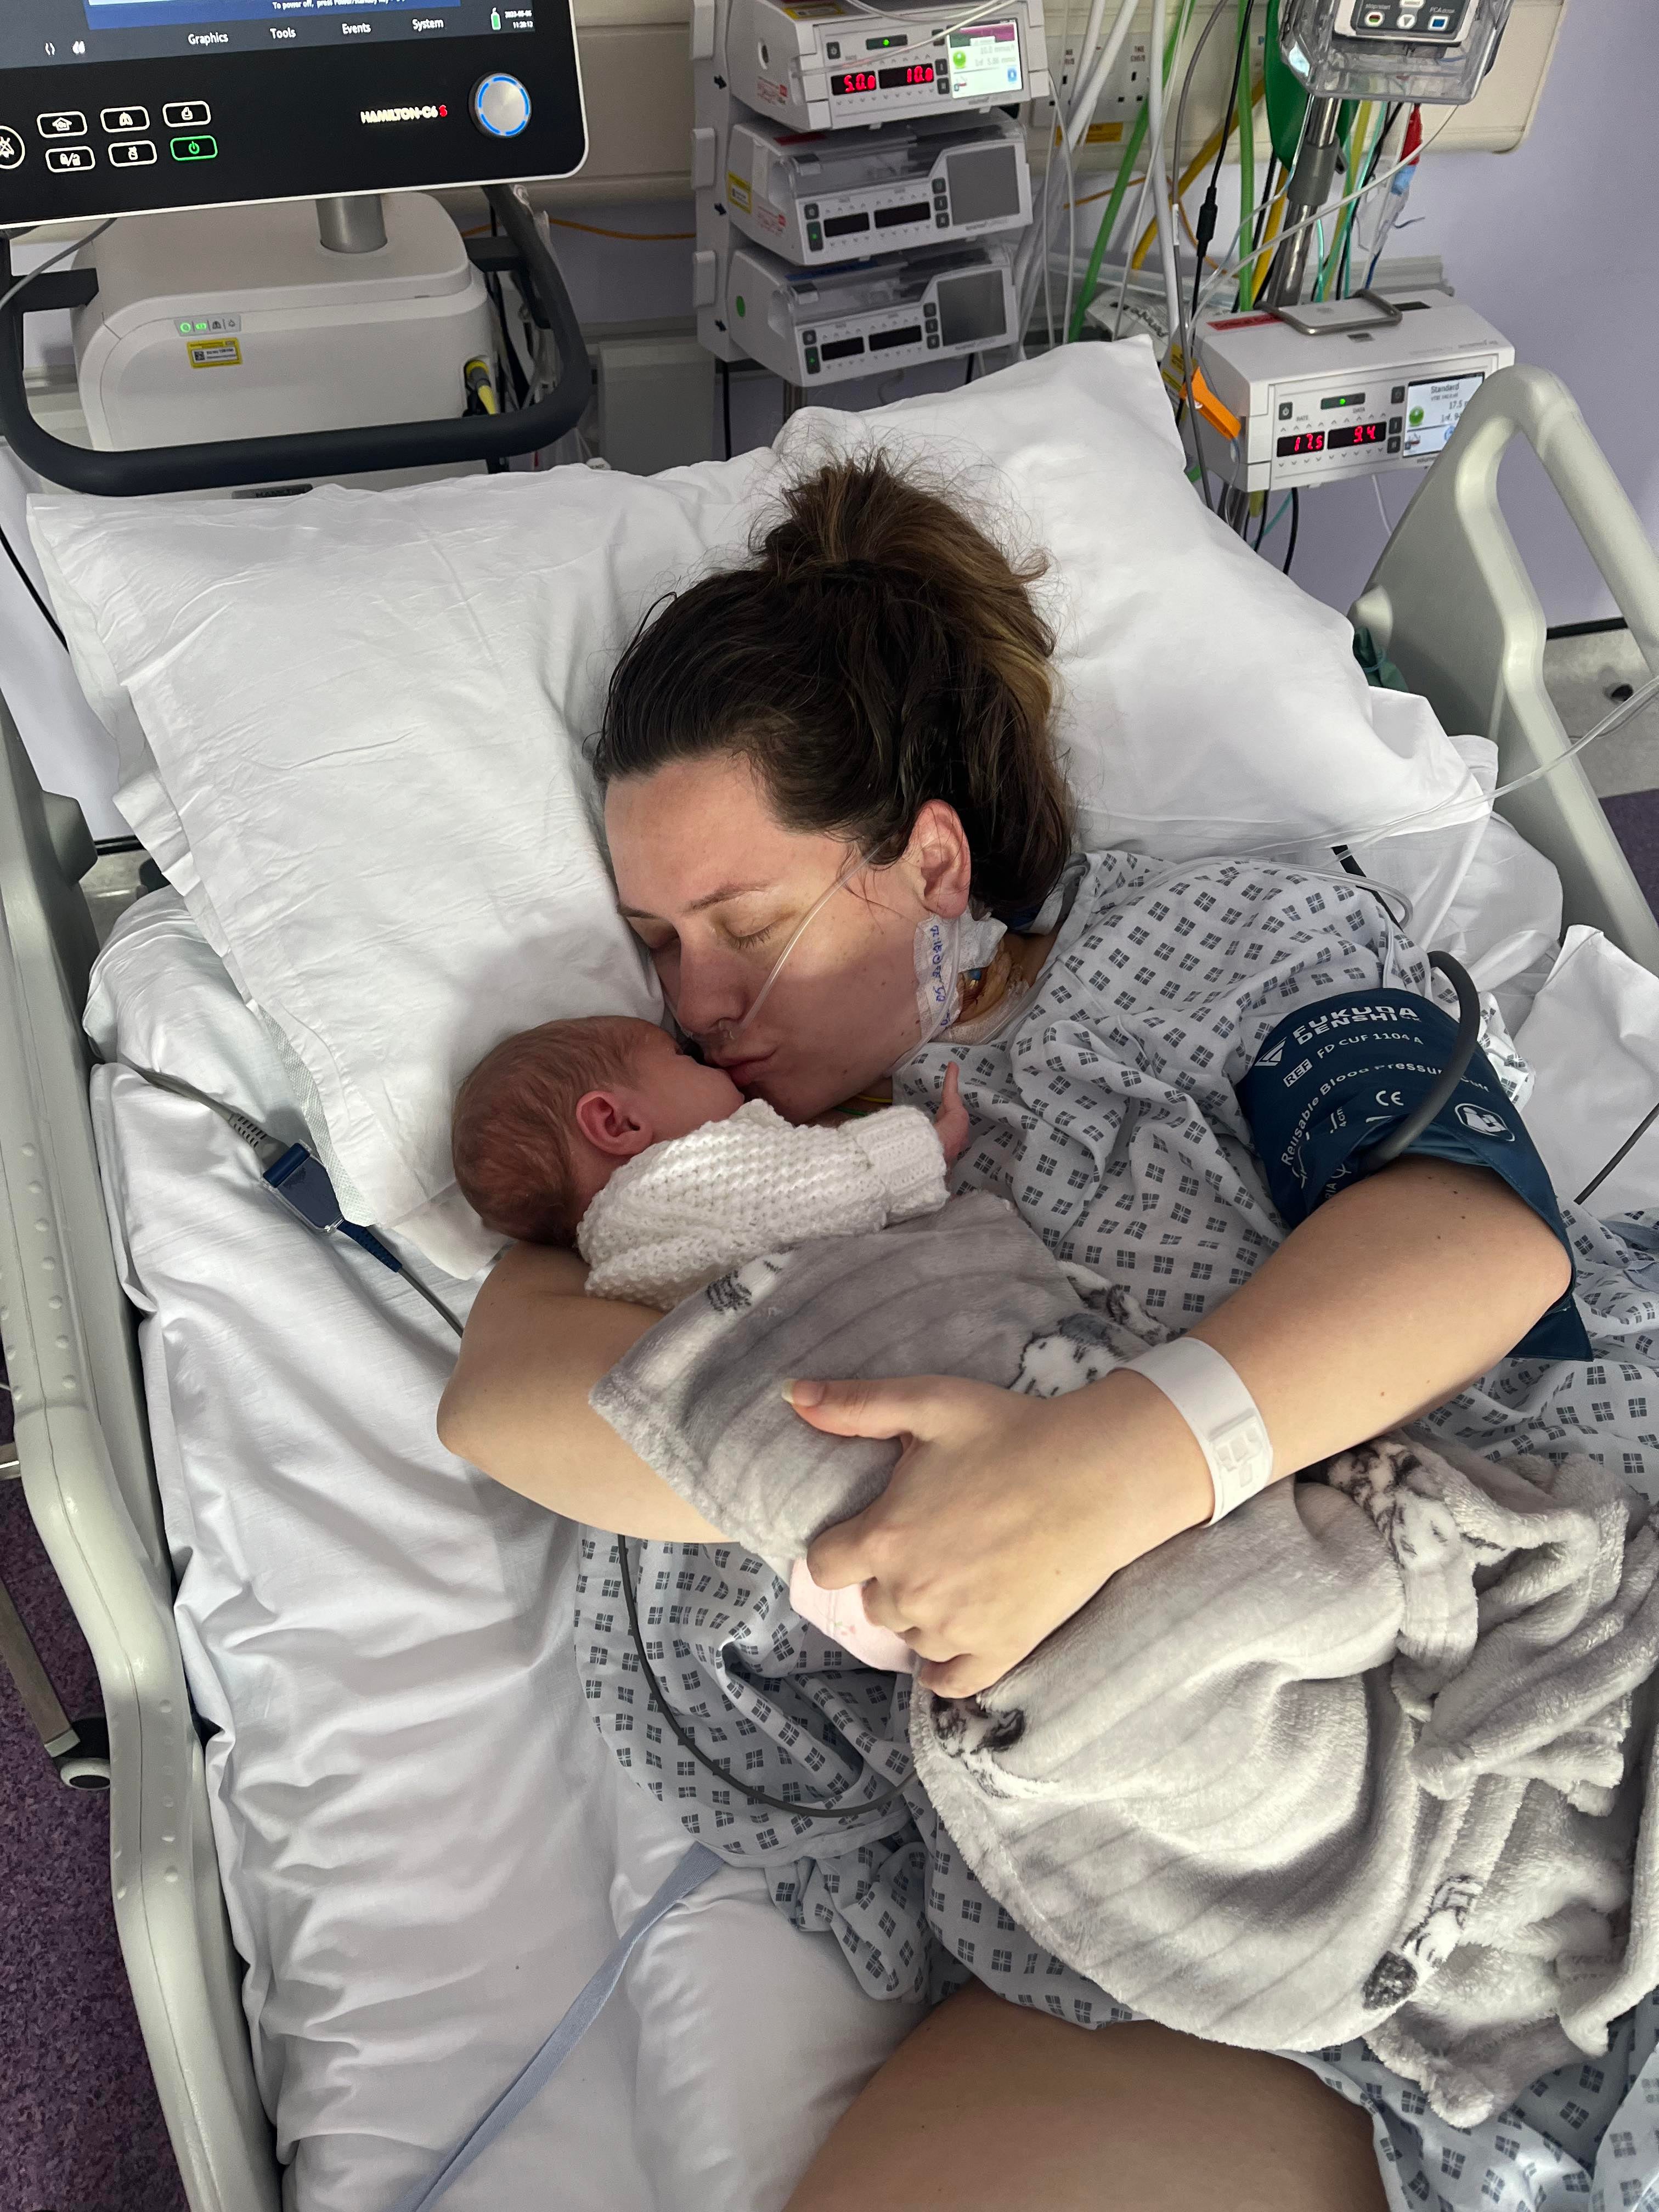 Six days after 27-year-old Charleigh Chatterton, from Harwich, Essex, gave birth to her daughter Alessia without any complications, she developed flu-like symptoms and a small rash on her stomach